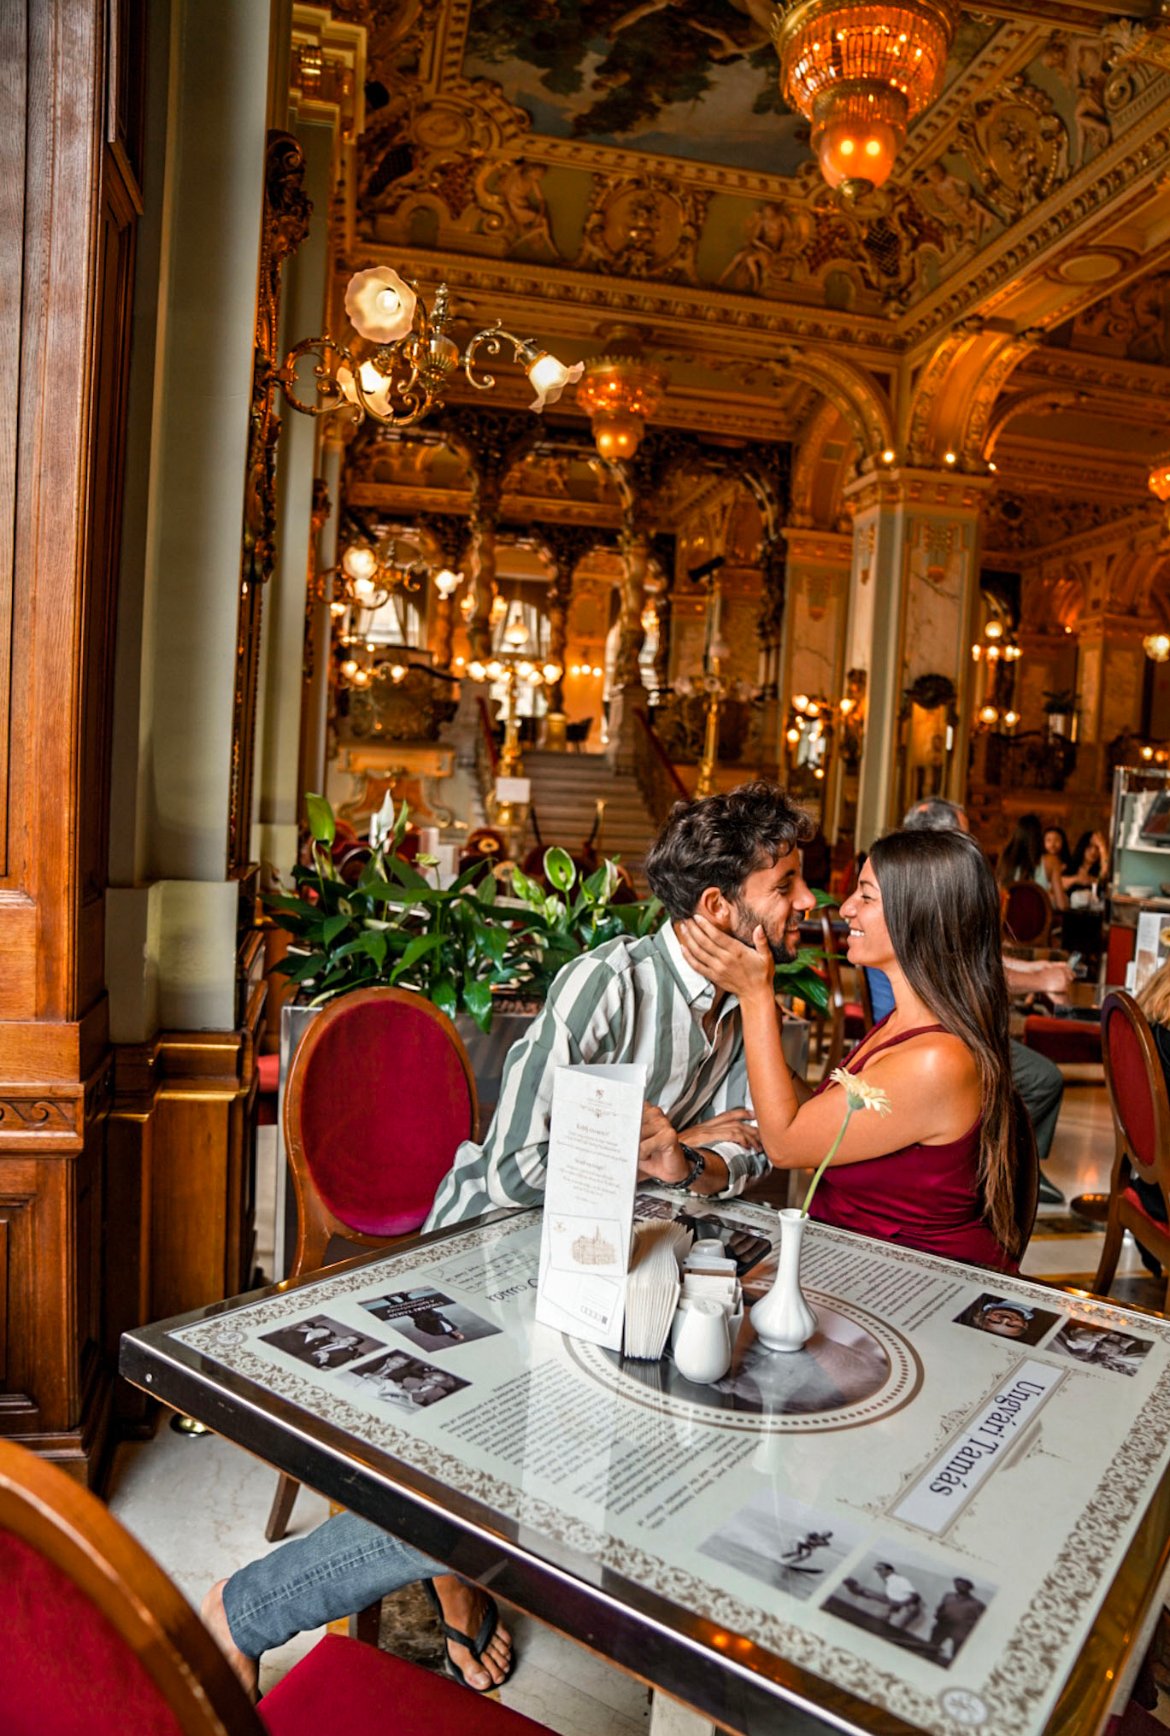 New York Cafe is the most glamorous cafe in the world.